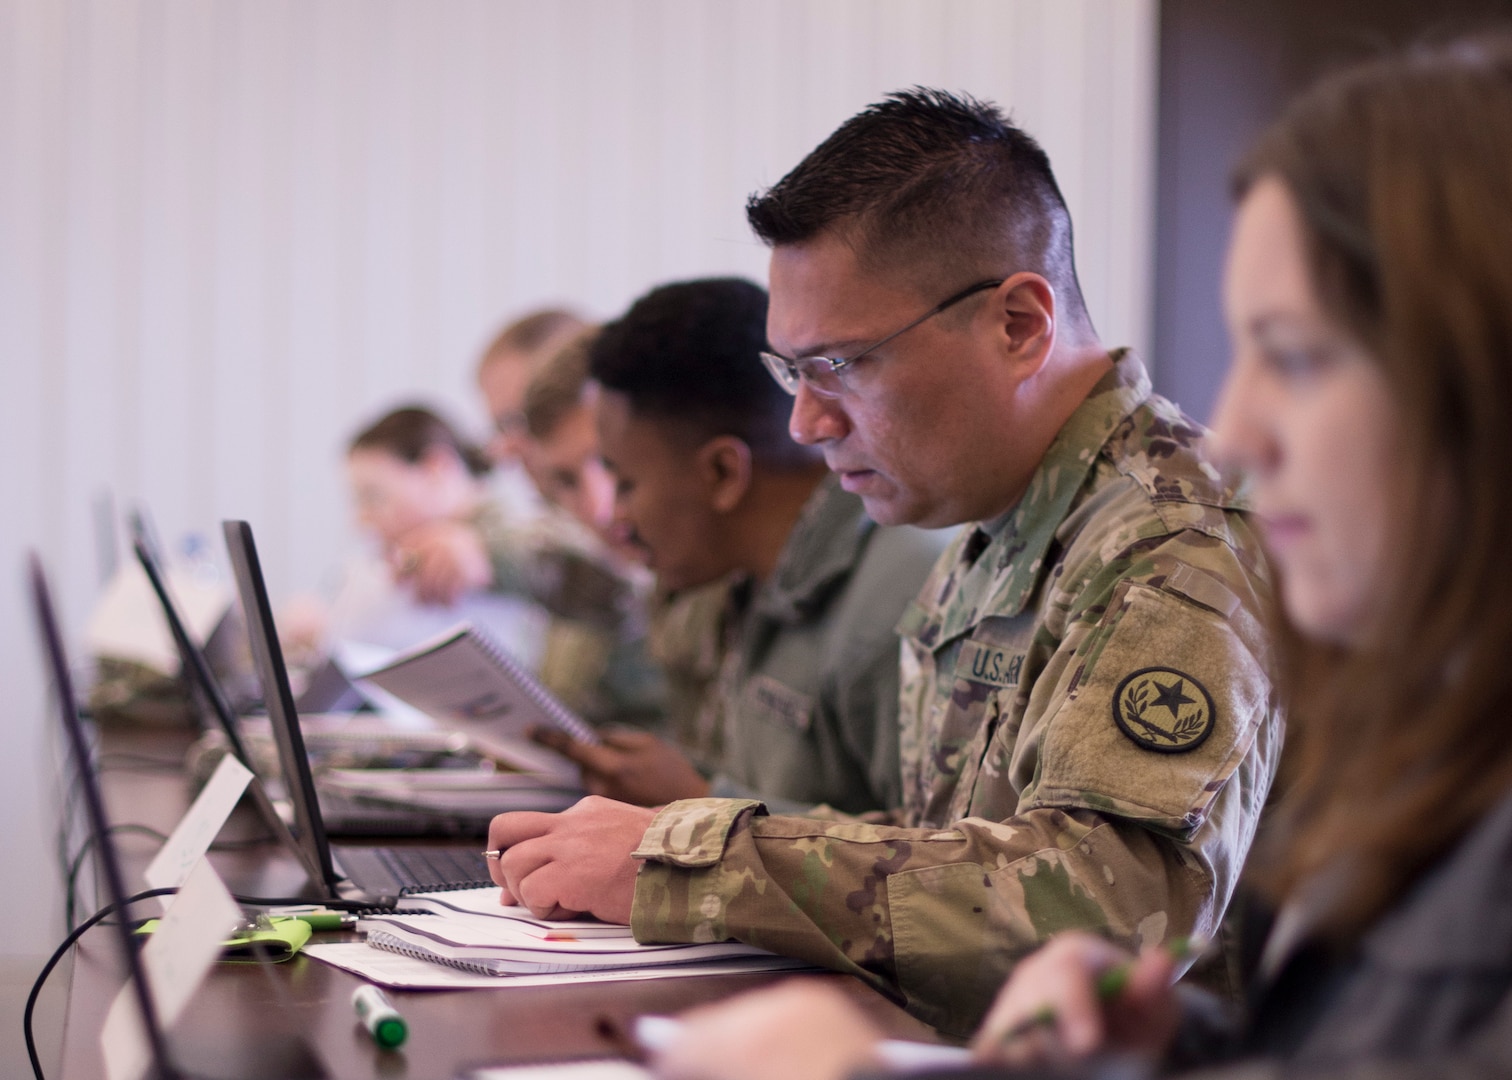 Texas Army National Guardsman analyzes network traffic as part of training week for exercise Cyber Shield 2019, at Camp Atterbury, Indiana, April 7, 2019 (U.S. Army/George B. Davis)